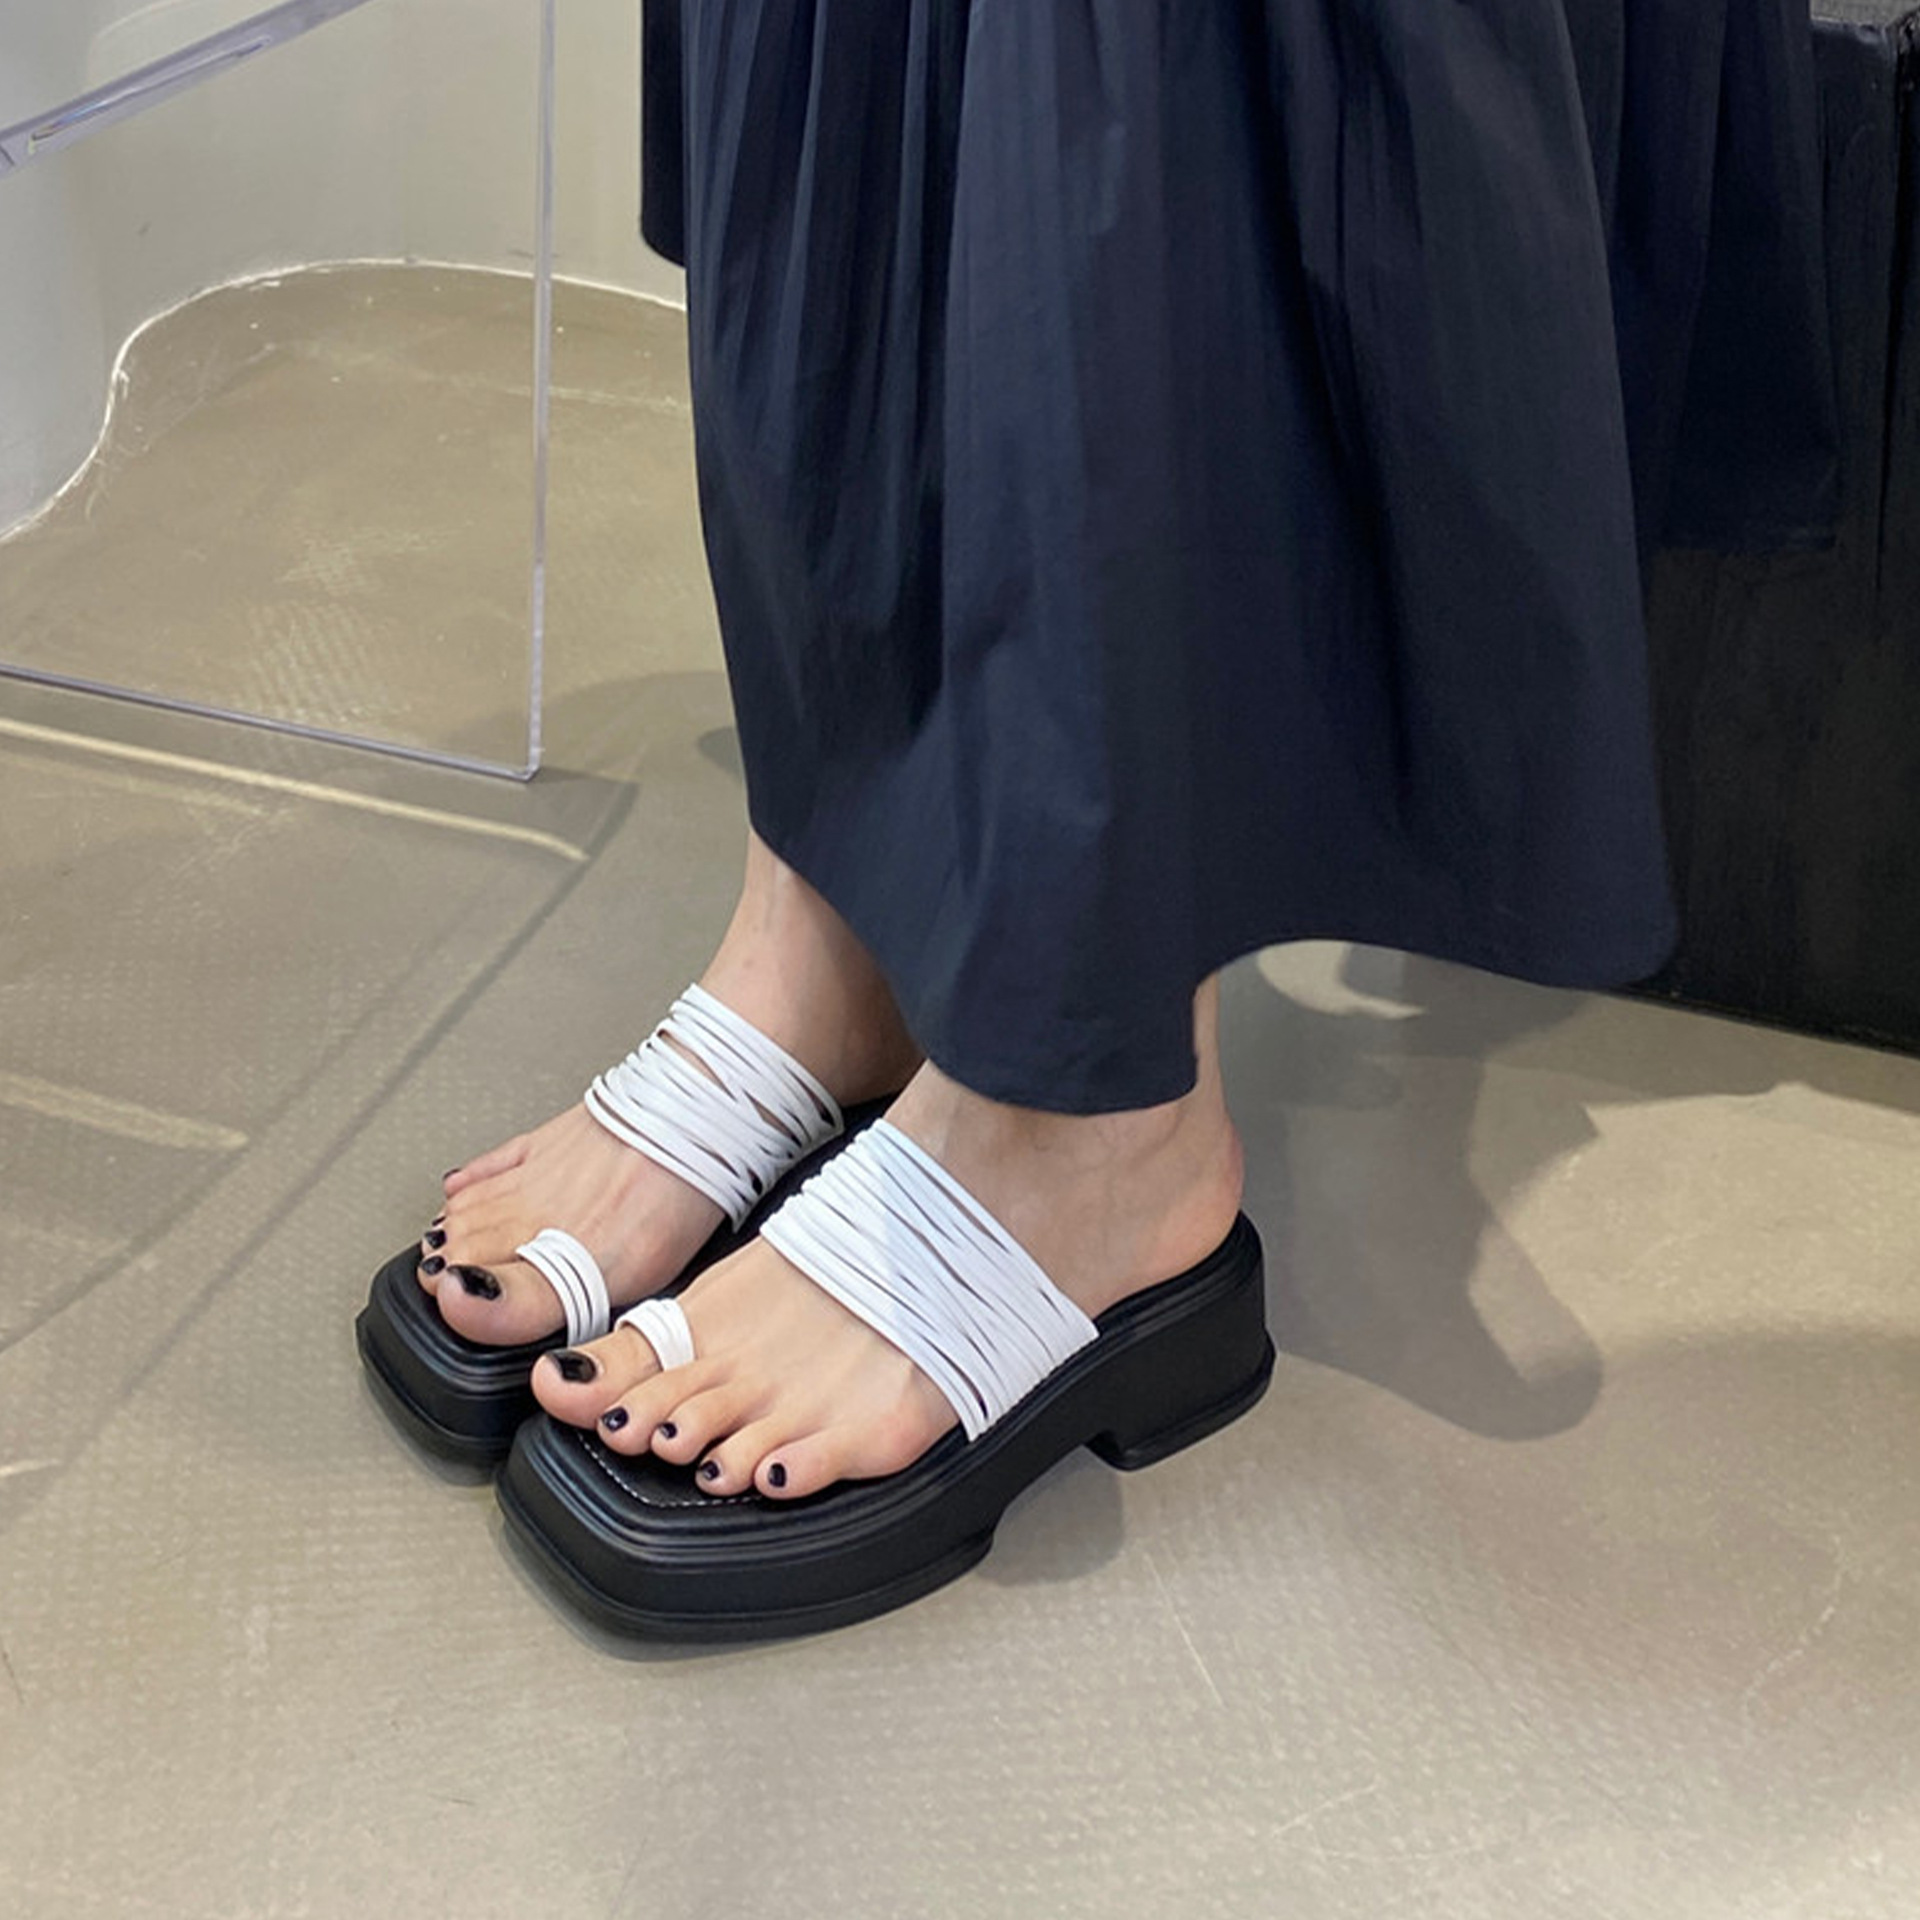 Sleek and polished for a professional look Wedge Sandals Comfortable and supportive for all-day wear